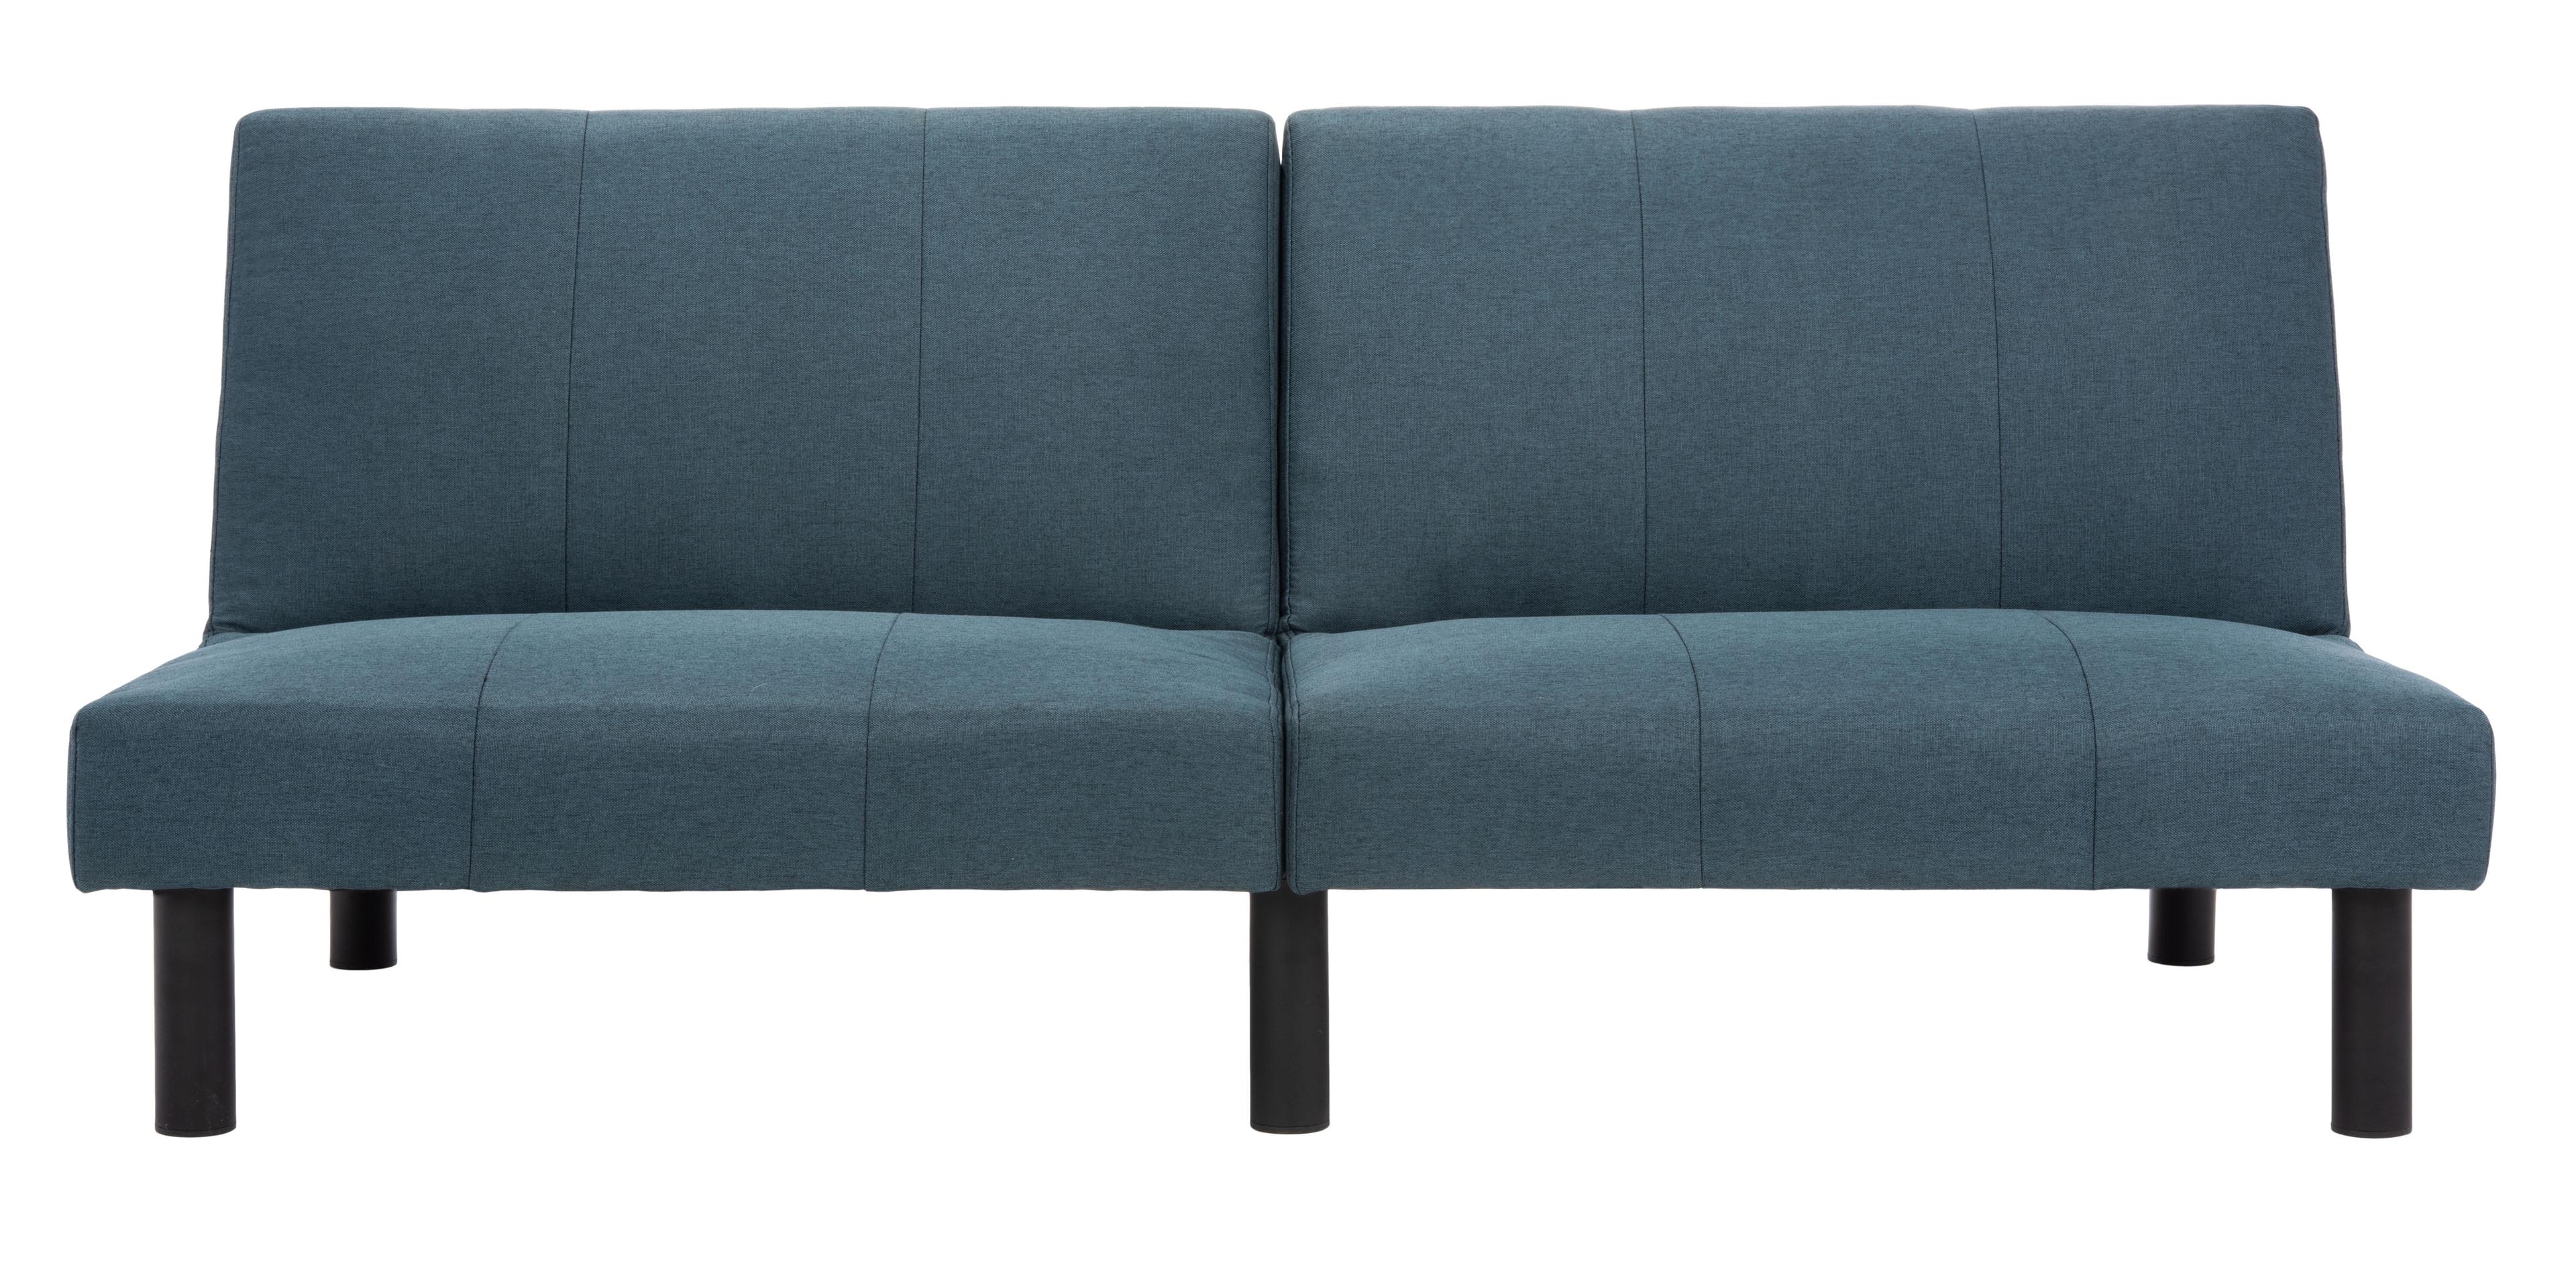 Contemporary Navy Tufted Twin Sleeper Sofa with Natural Wood Legs